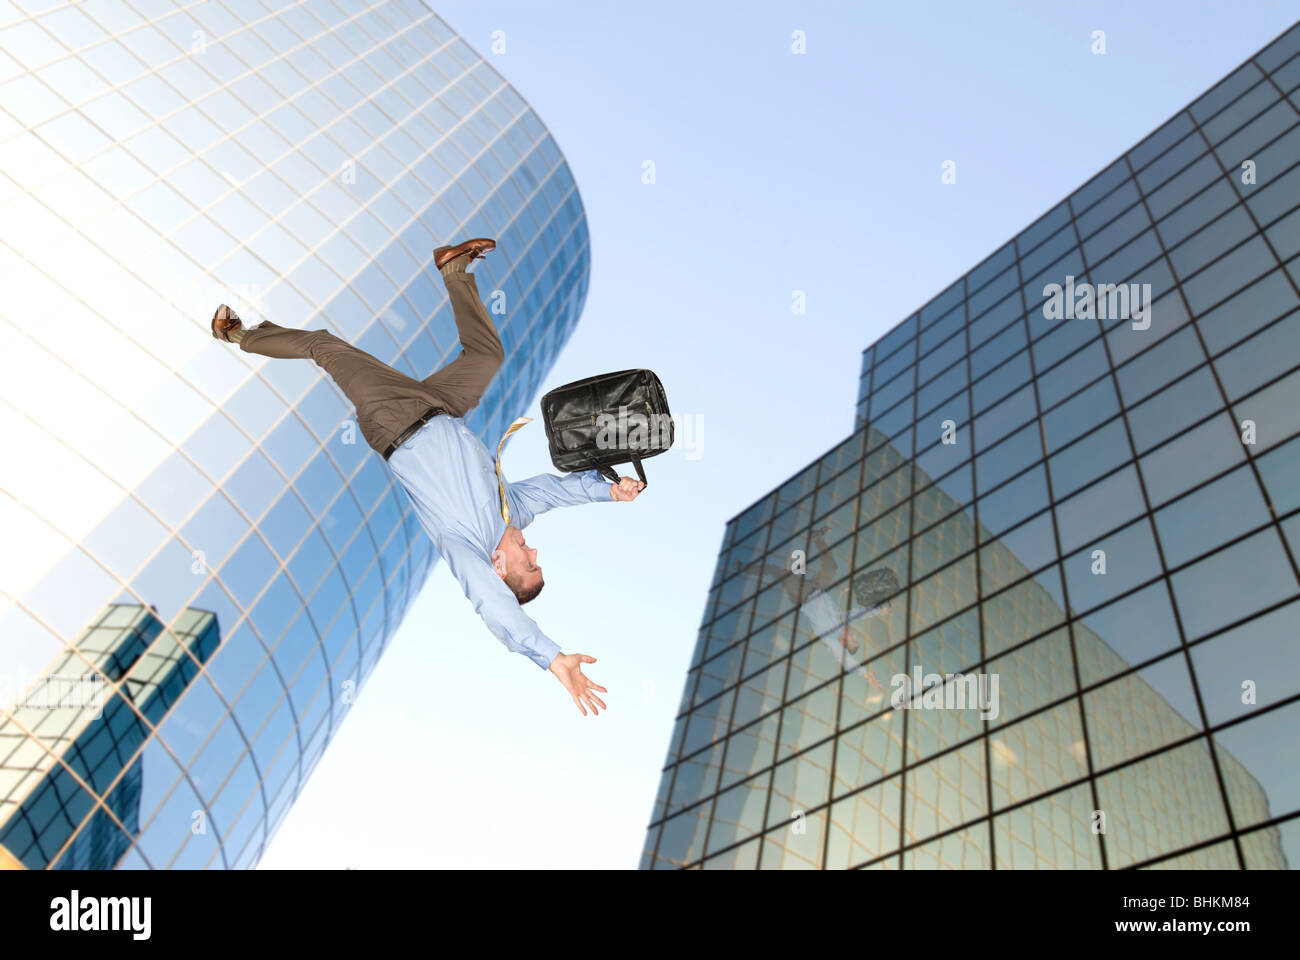 A businessman falls from a building rooftop after too much emotional stress at work caused him to commit suicide. Stock Photo